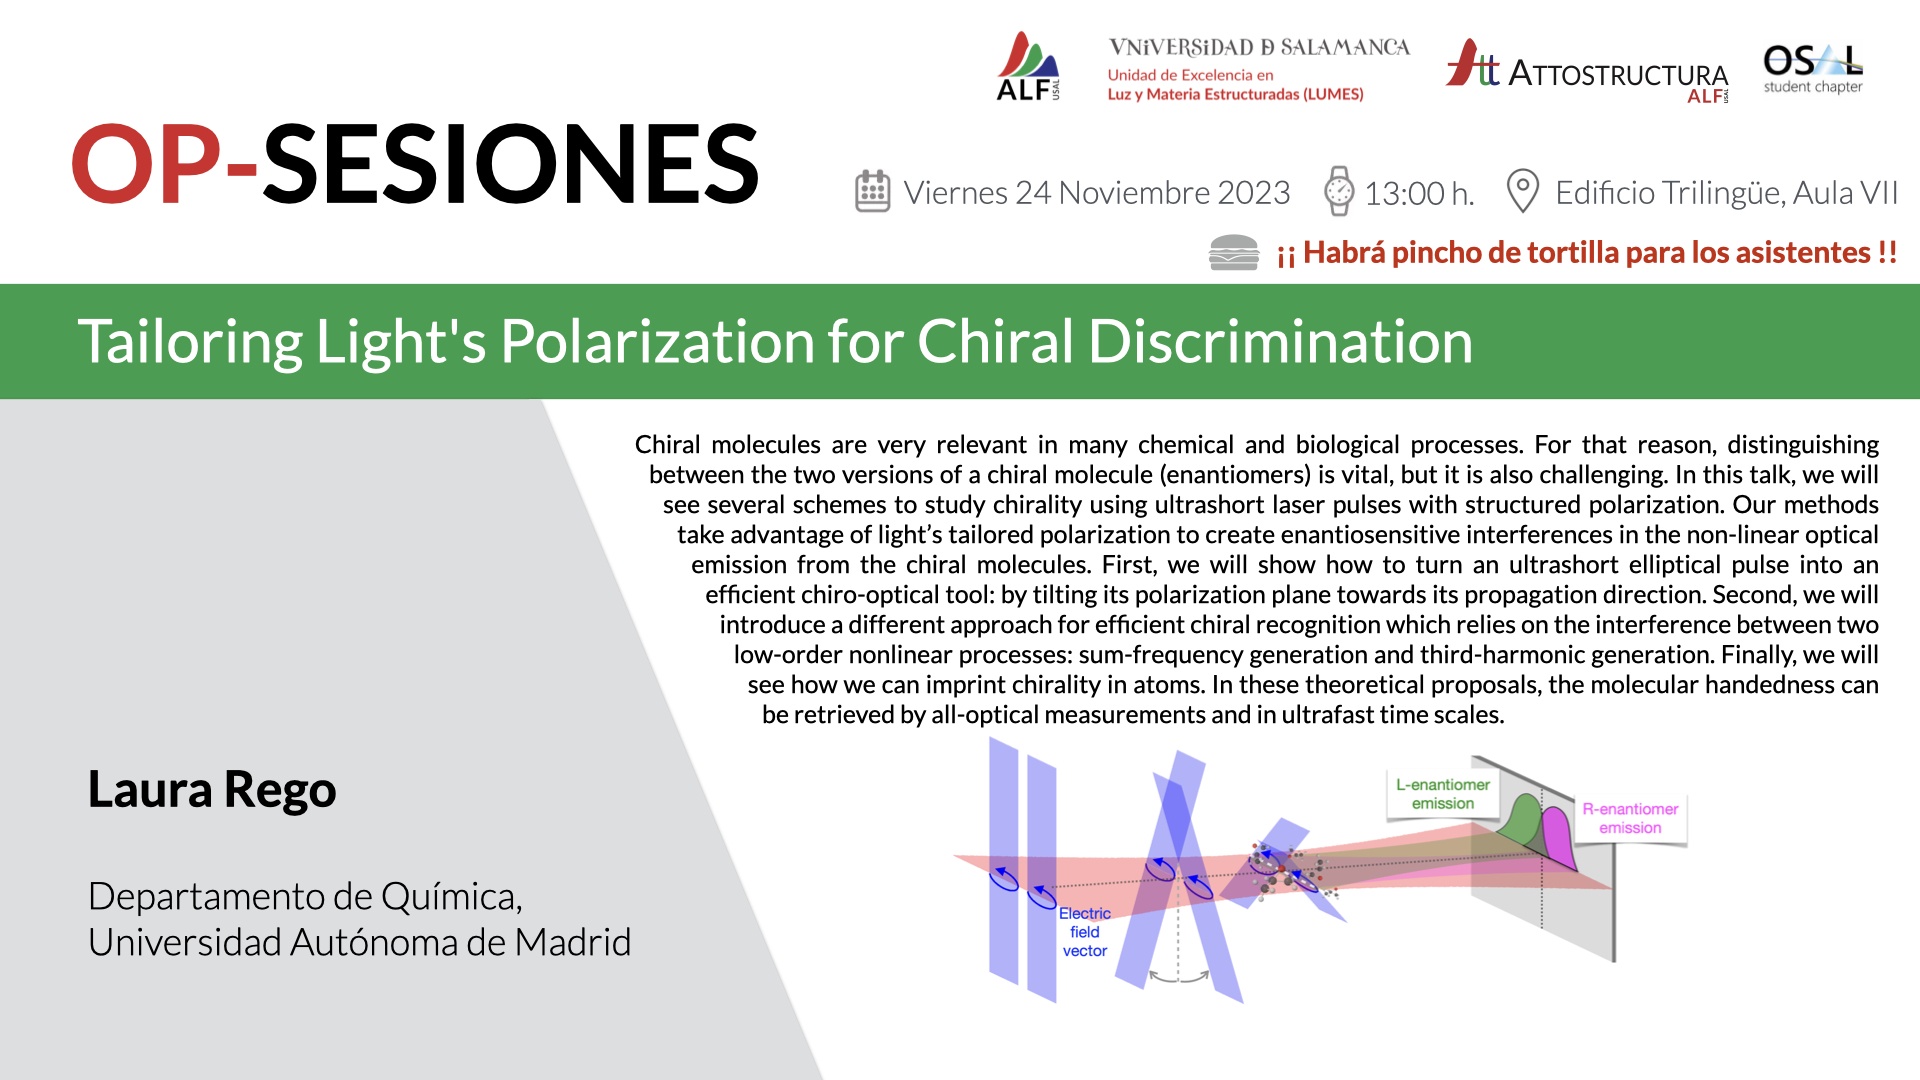 OP Session – Tailoring Light’s Polarization for Chiral Discrimination